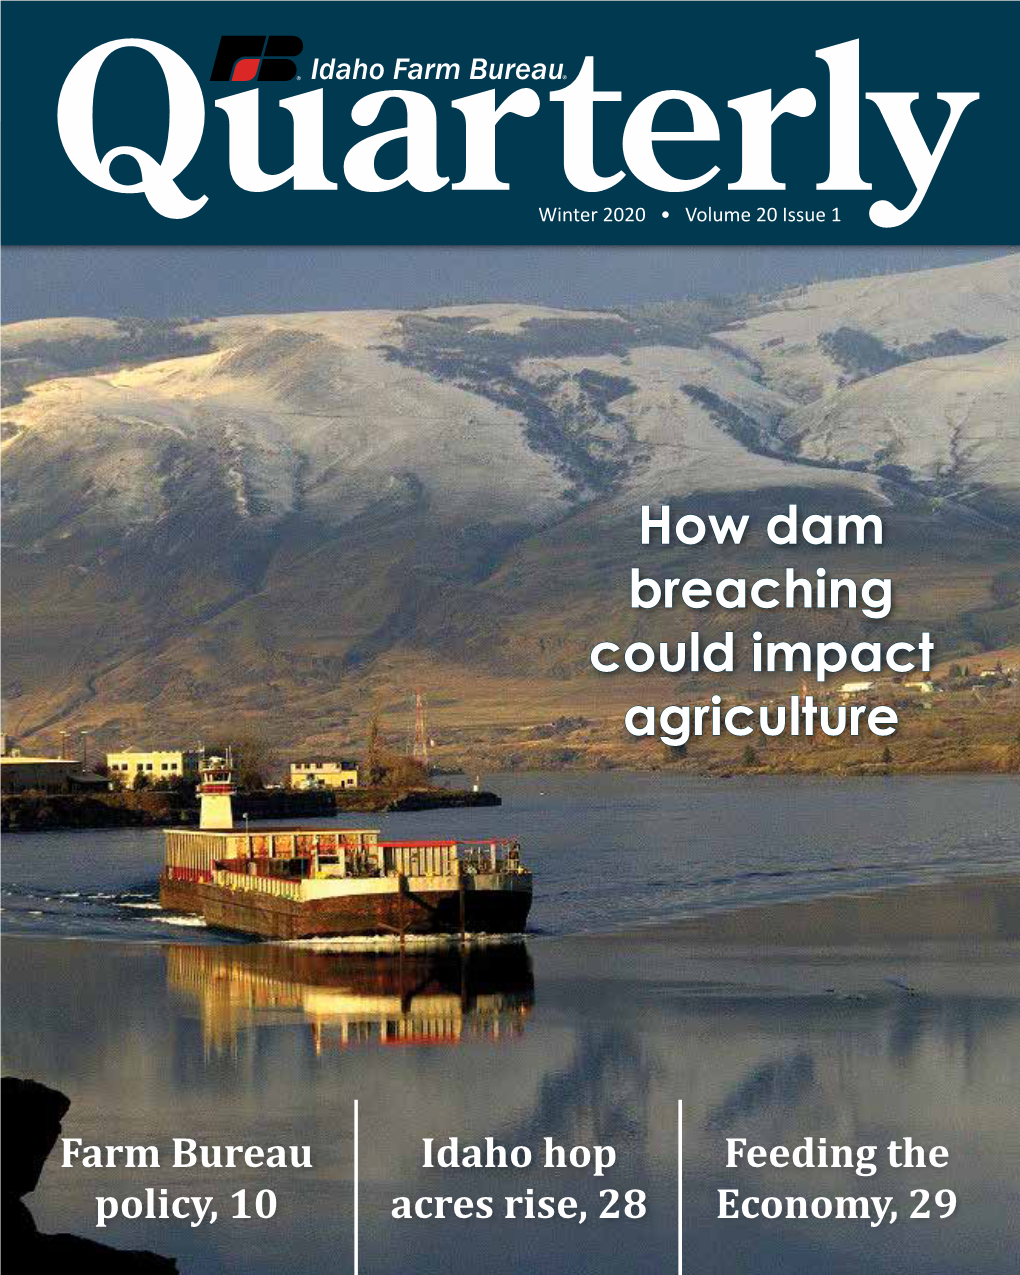 How Dam Breaching Could Impact Agriculture